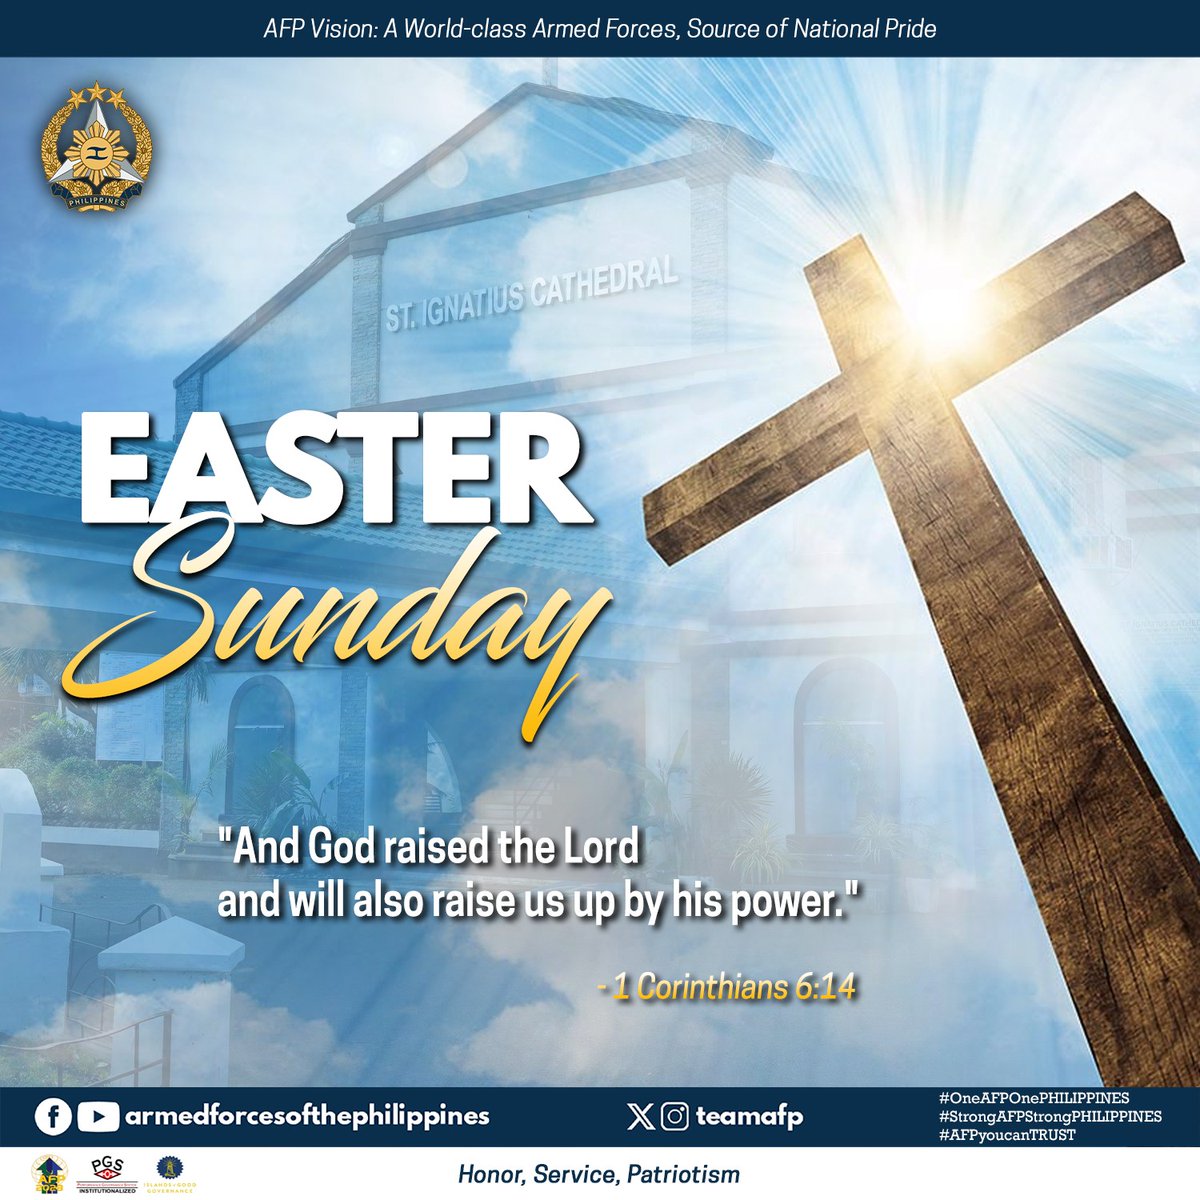 EASTER SUNDAY | 'And God raised the Lord and will also raise us up by his power.' - 1 Corinthians 6:14

#LENT2024
#OneAFPOnePHILIPPINES
#StrongAFPStrongPHILIPPINES
#AFPyoucanTRUST